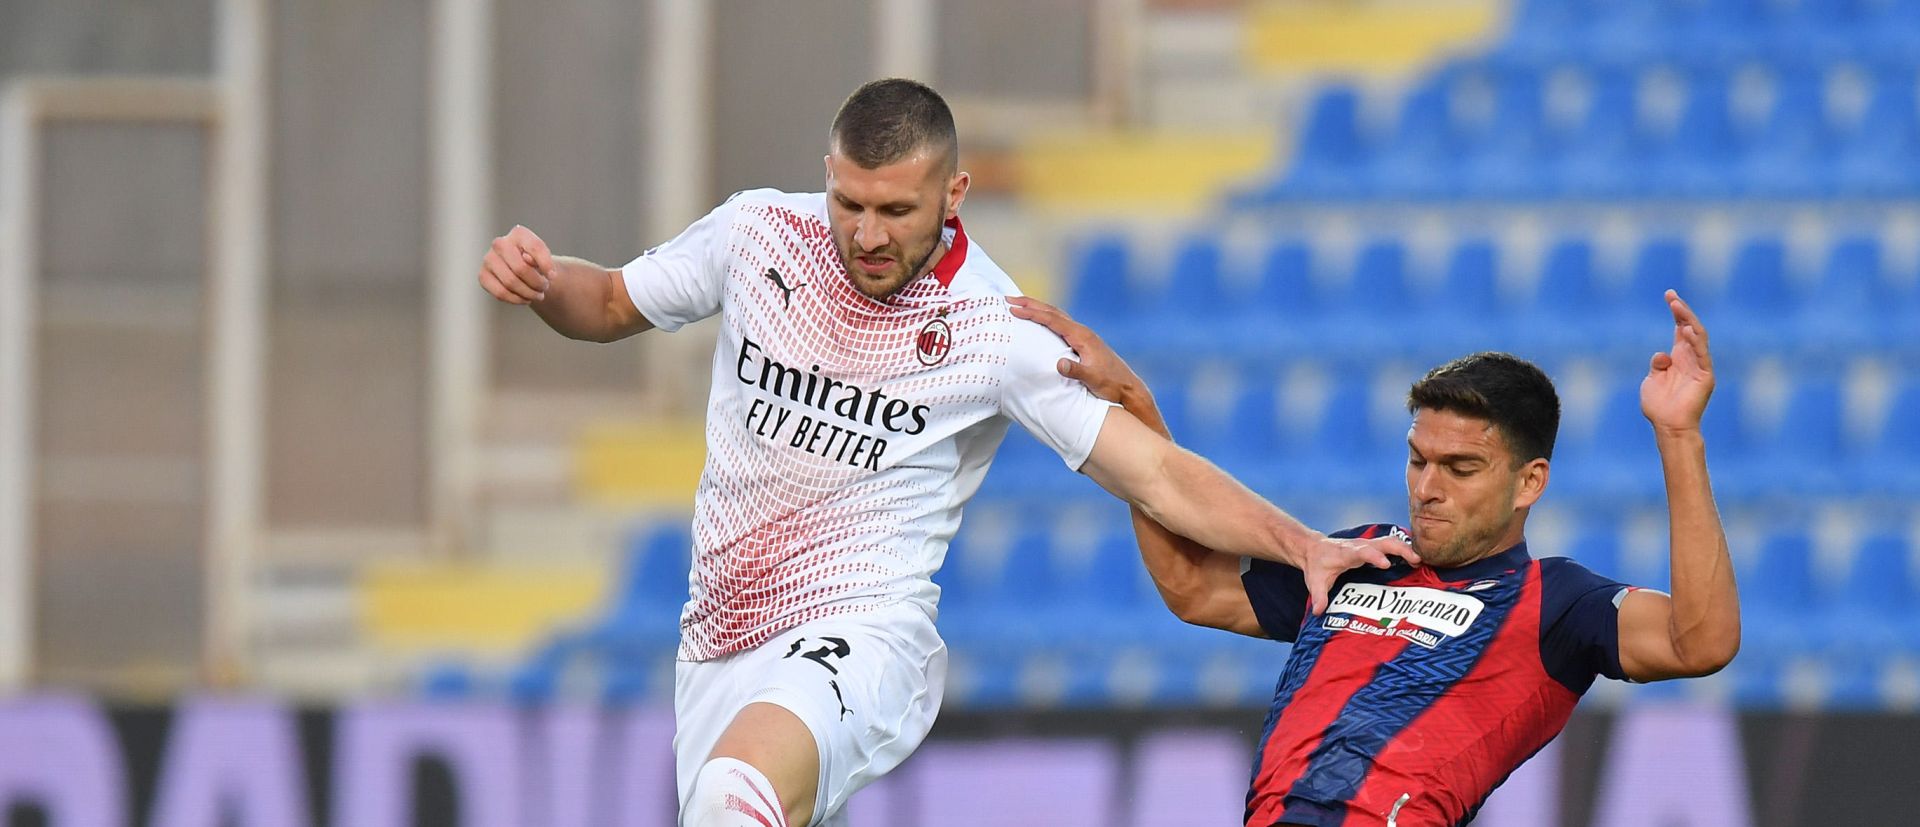 epa08702042 Milan's Ante Rebic is tackled by Crotone's Lisandro Magallan (R) during the Italian Serie A soccer match between FC Crotone and AC Milan at the Ezio Scida stadium in Crotone, Italy, 27 September 2020.  EPA/CARMELO IMBESI